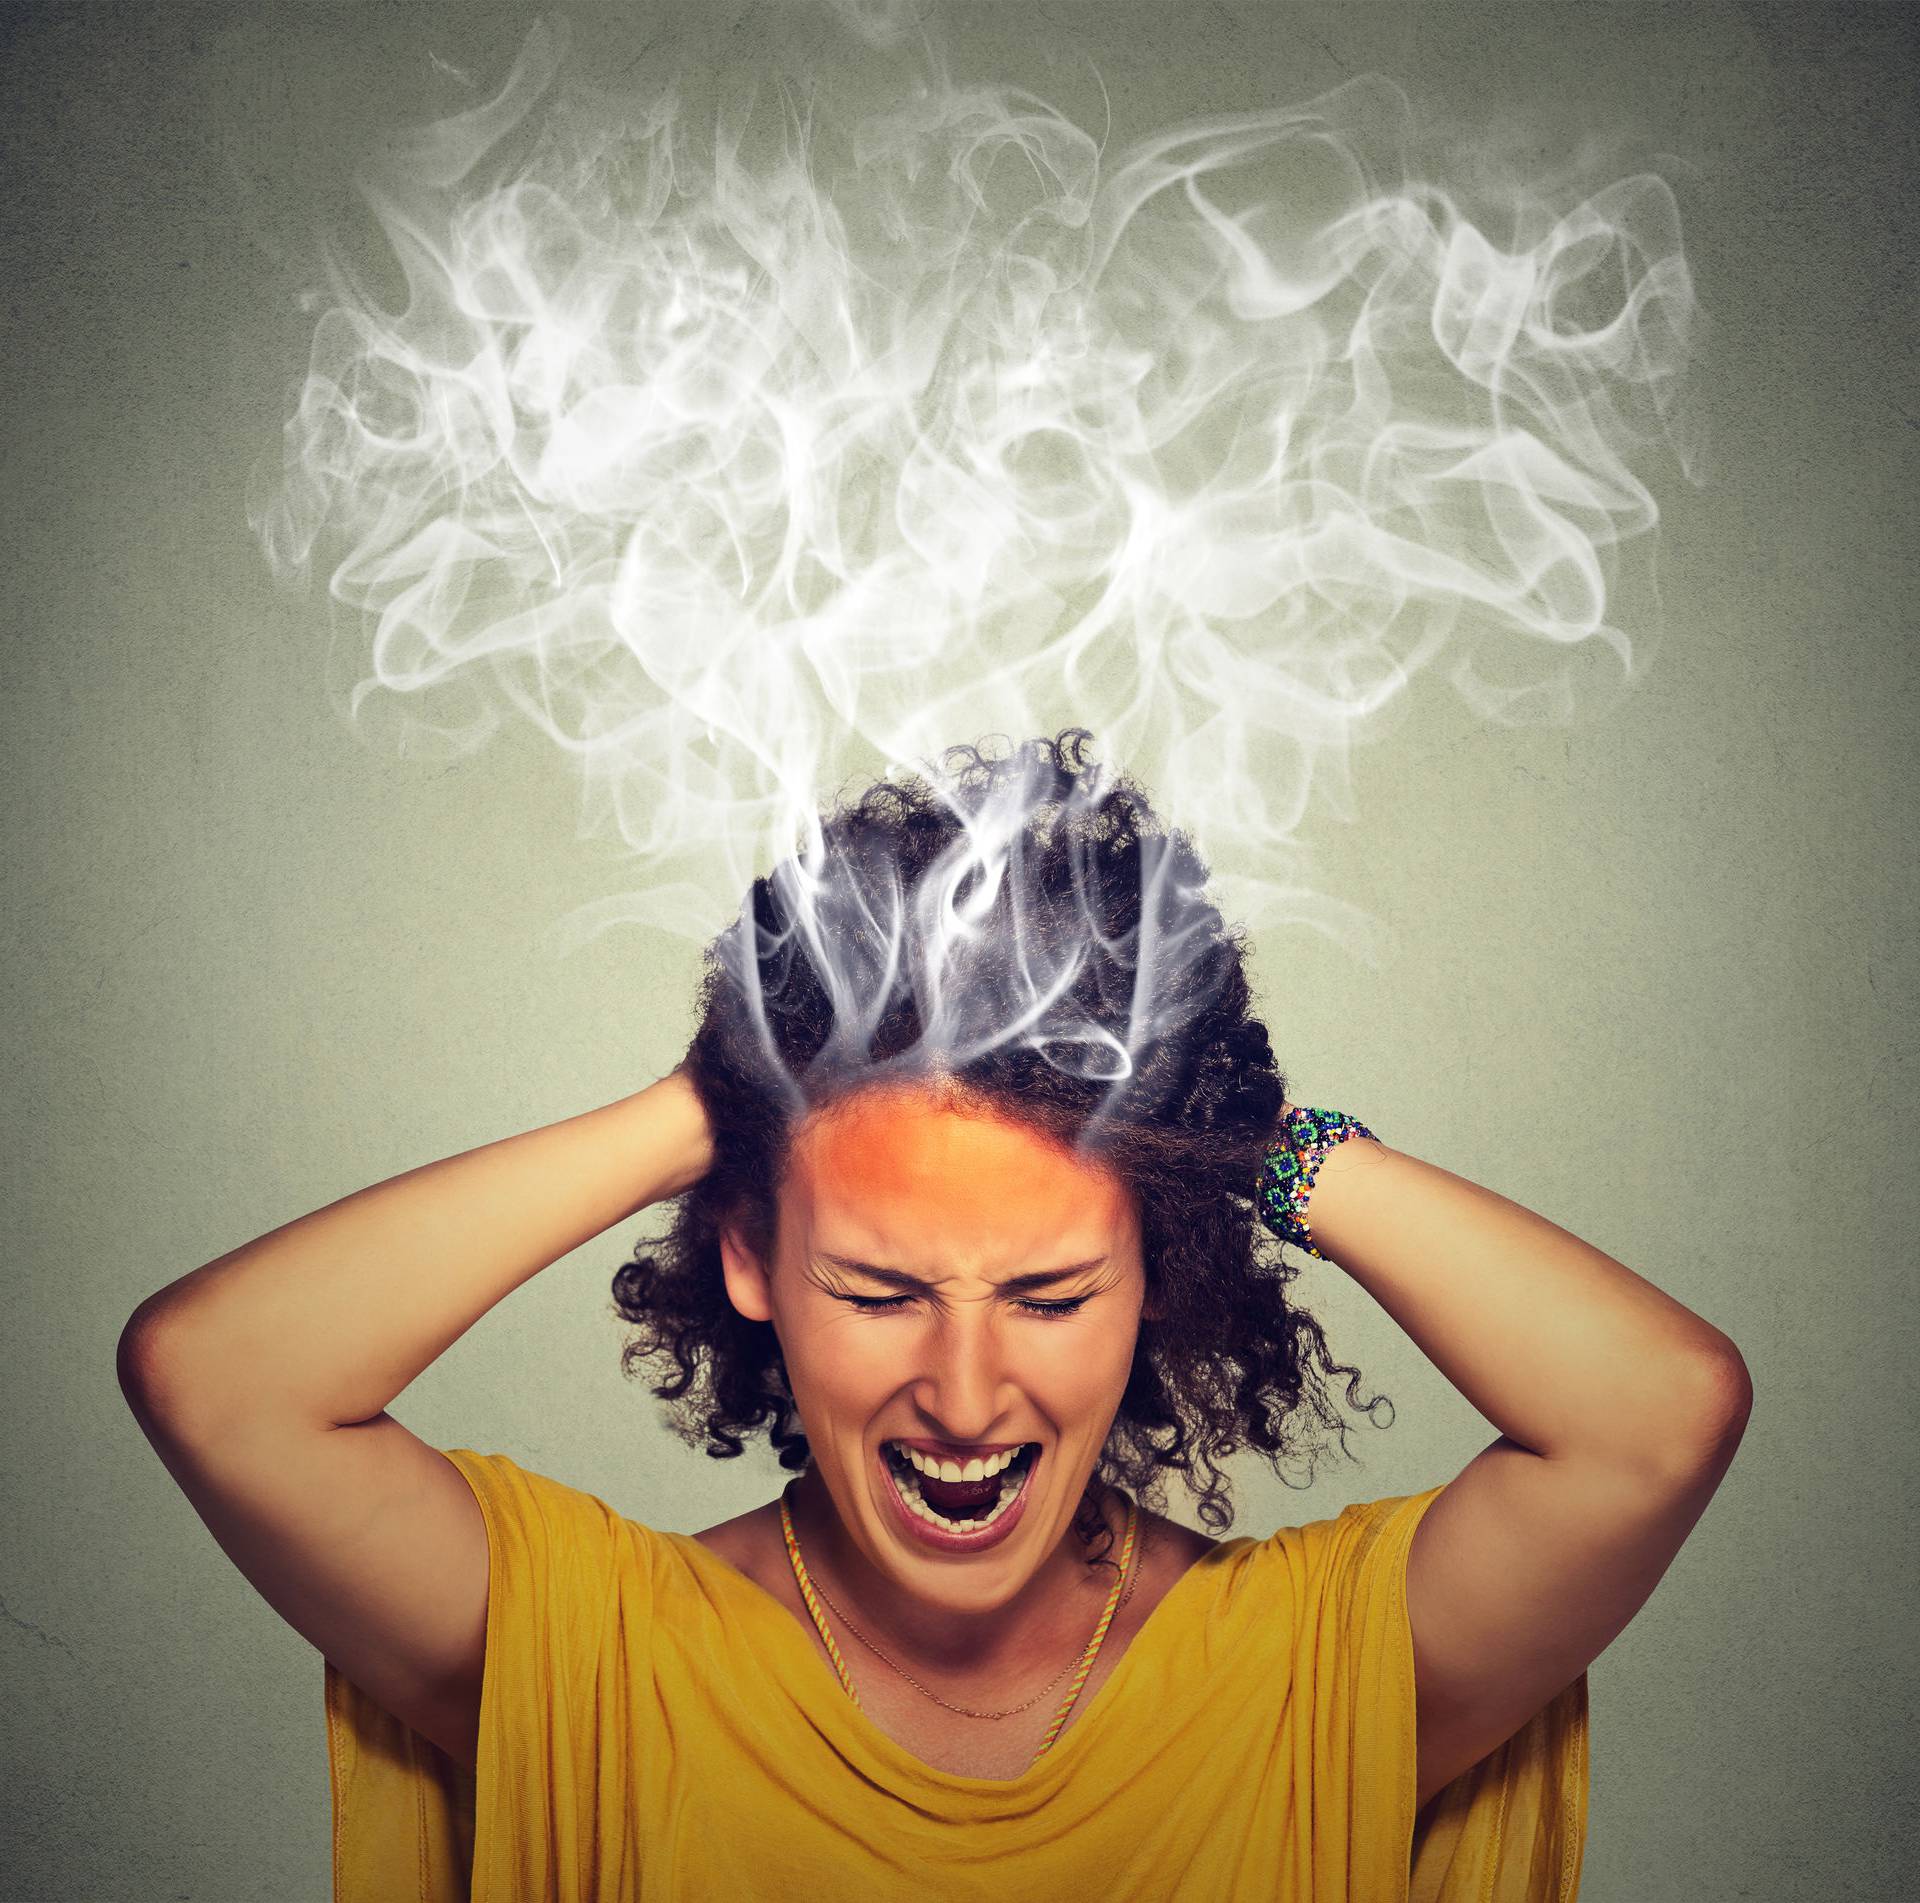 stressed woman screaming frustrated thinking too hard steam coming out of head